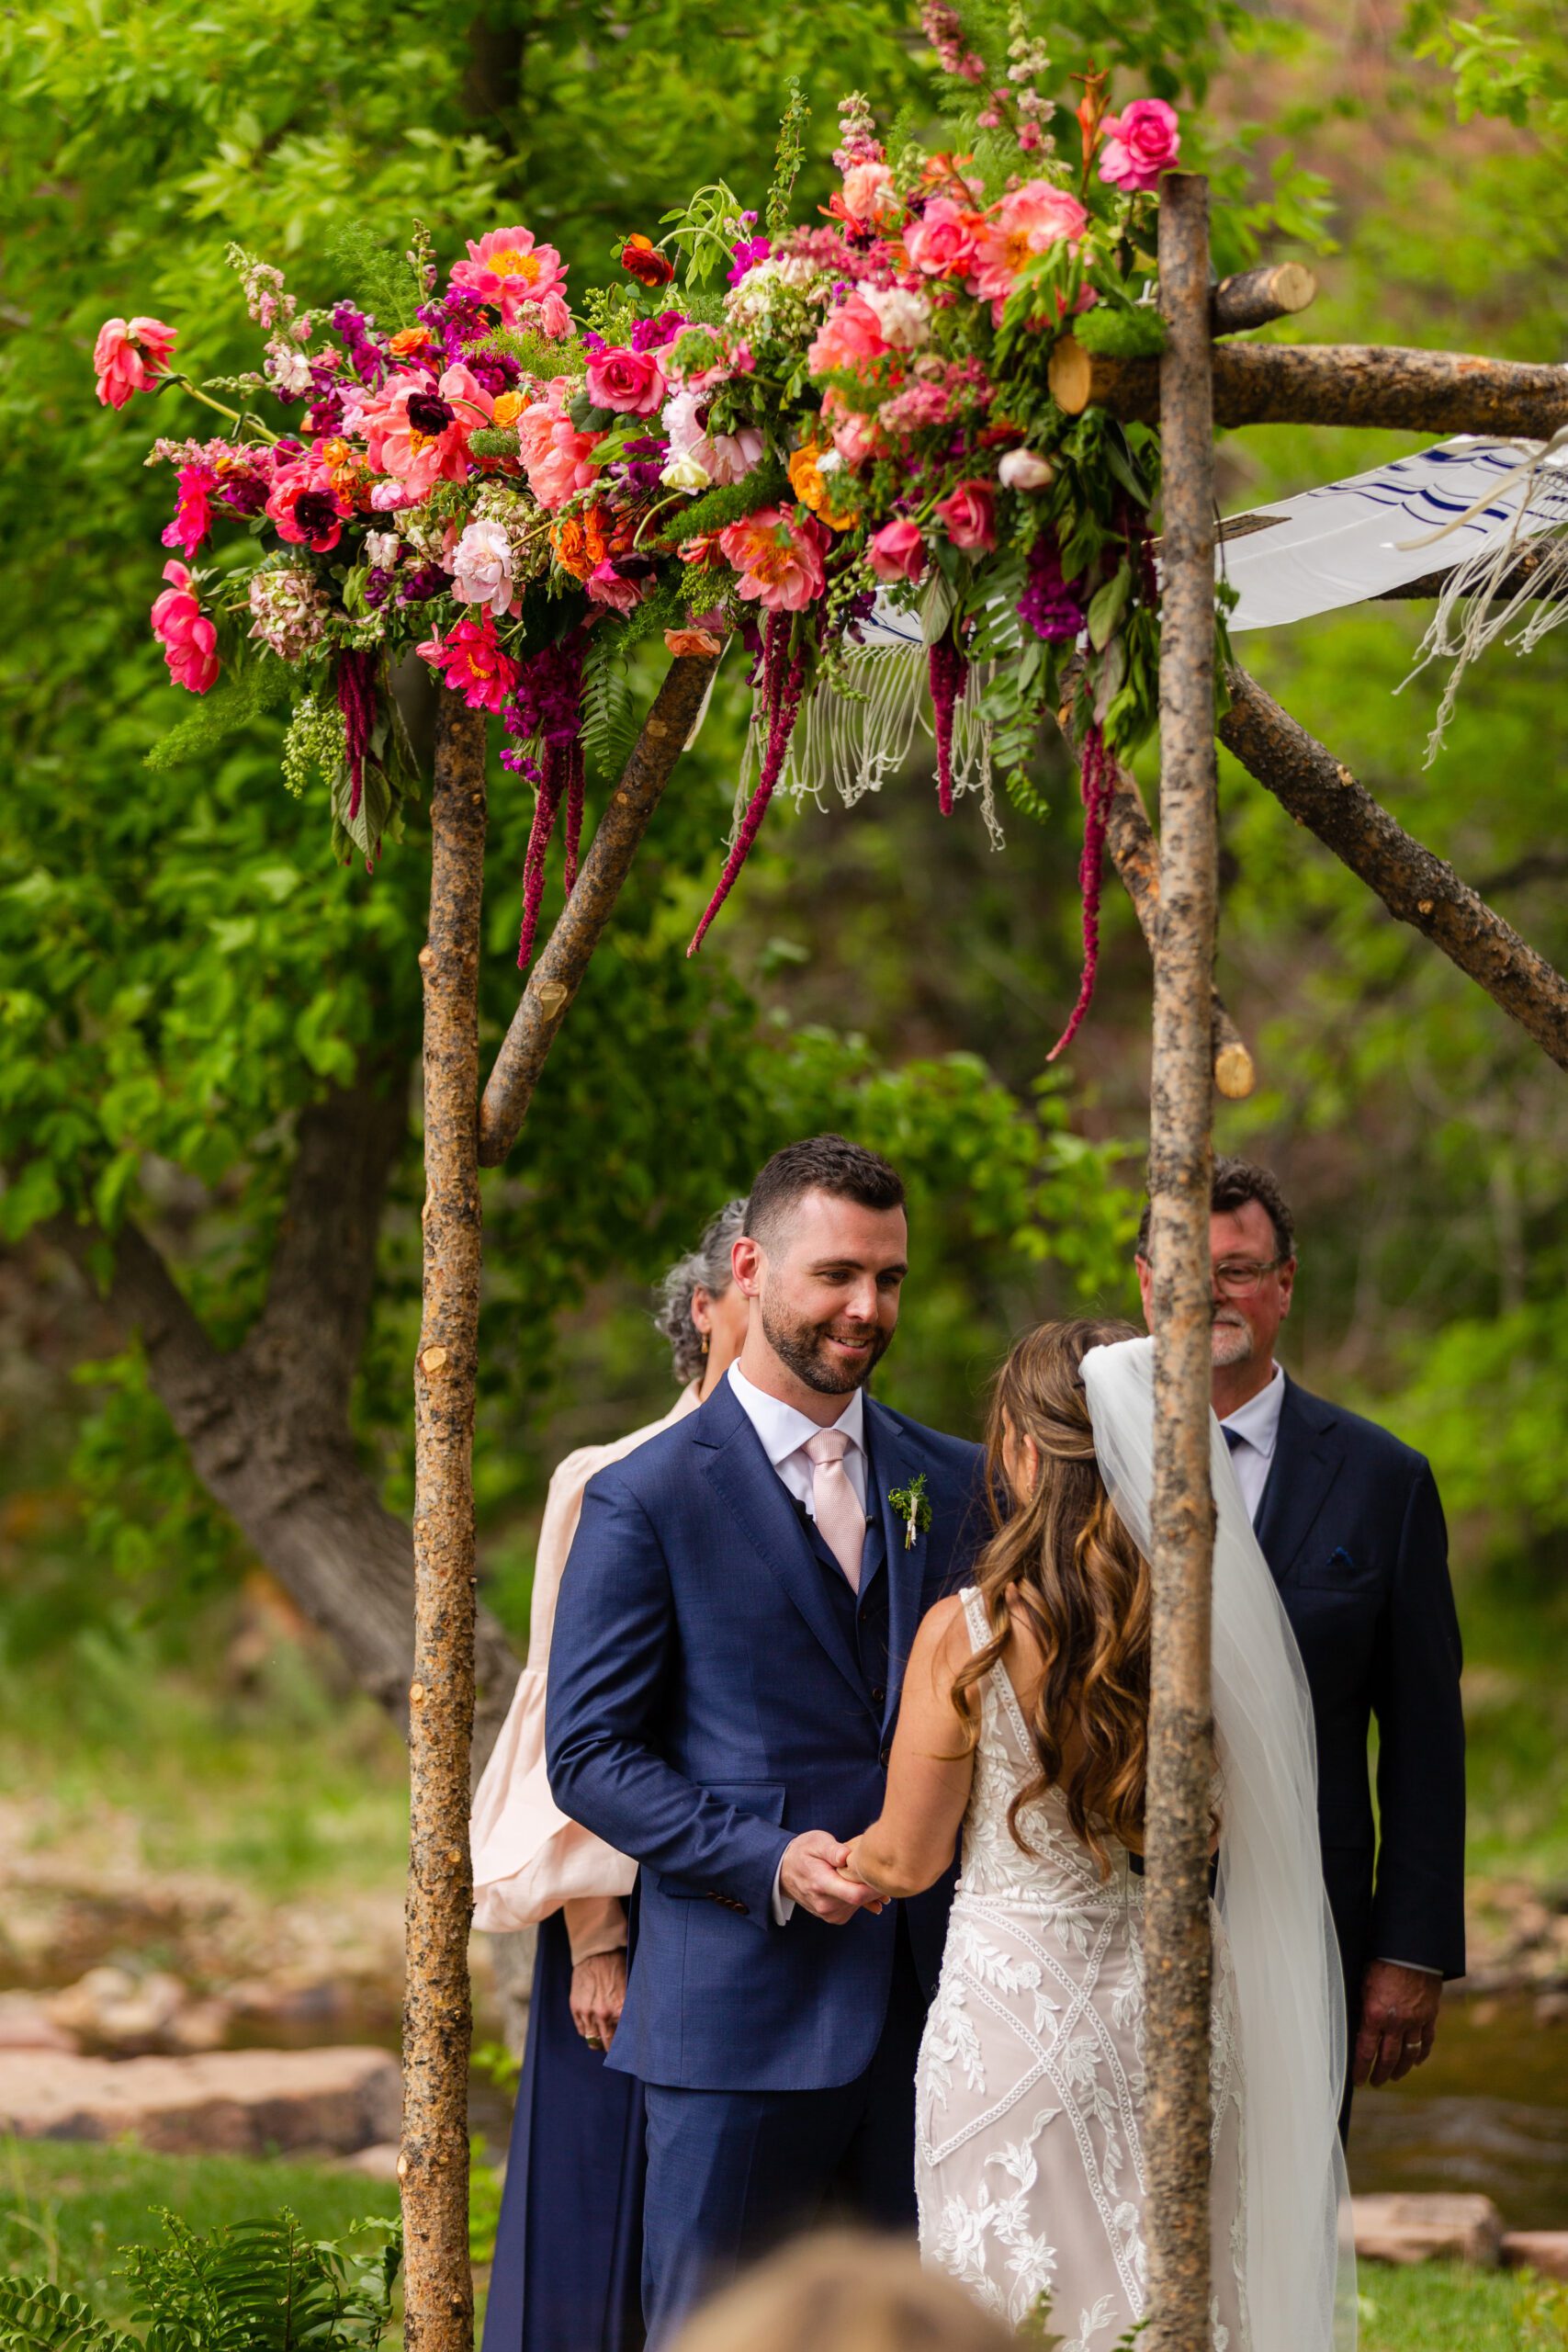 sustainable colorado wedding, wedding chuppah, floral chuppah, spring chuppah, jewish wedding, martha stewart weddings, BRIDES, green wedding shoes, the knot, Carats and Cake